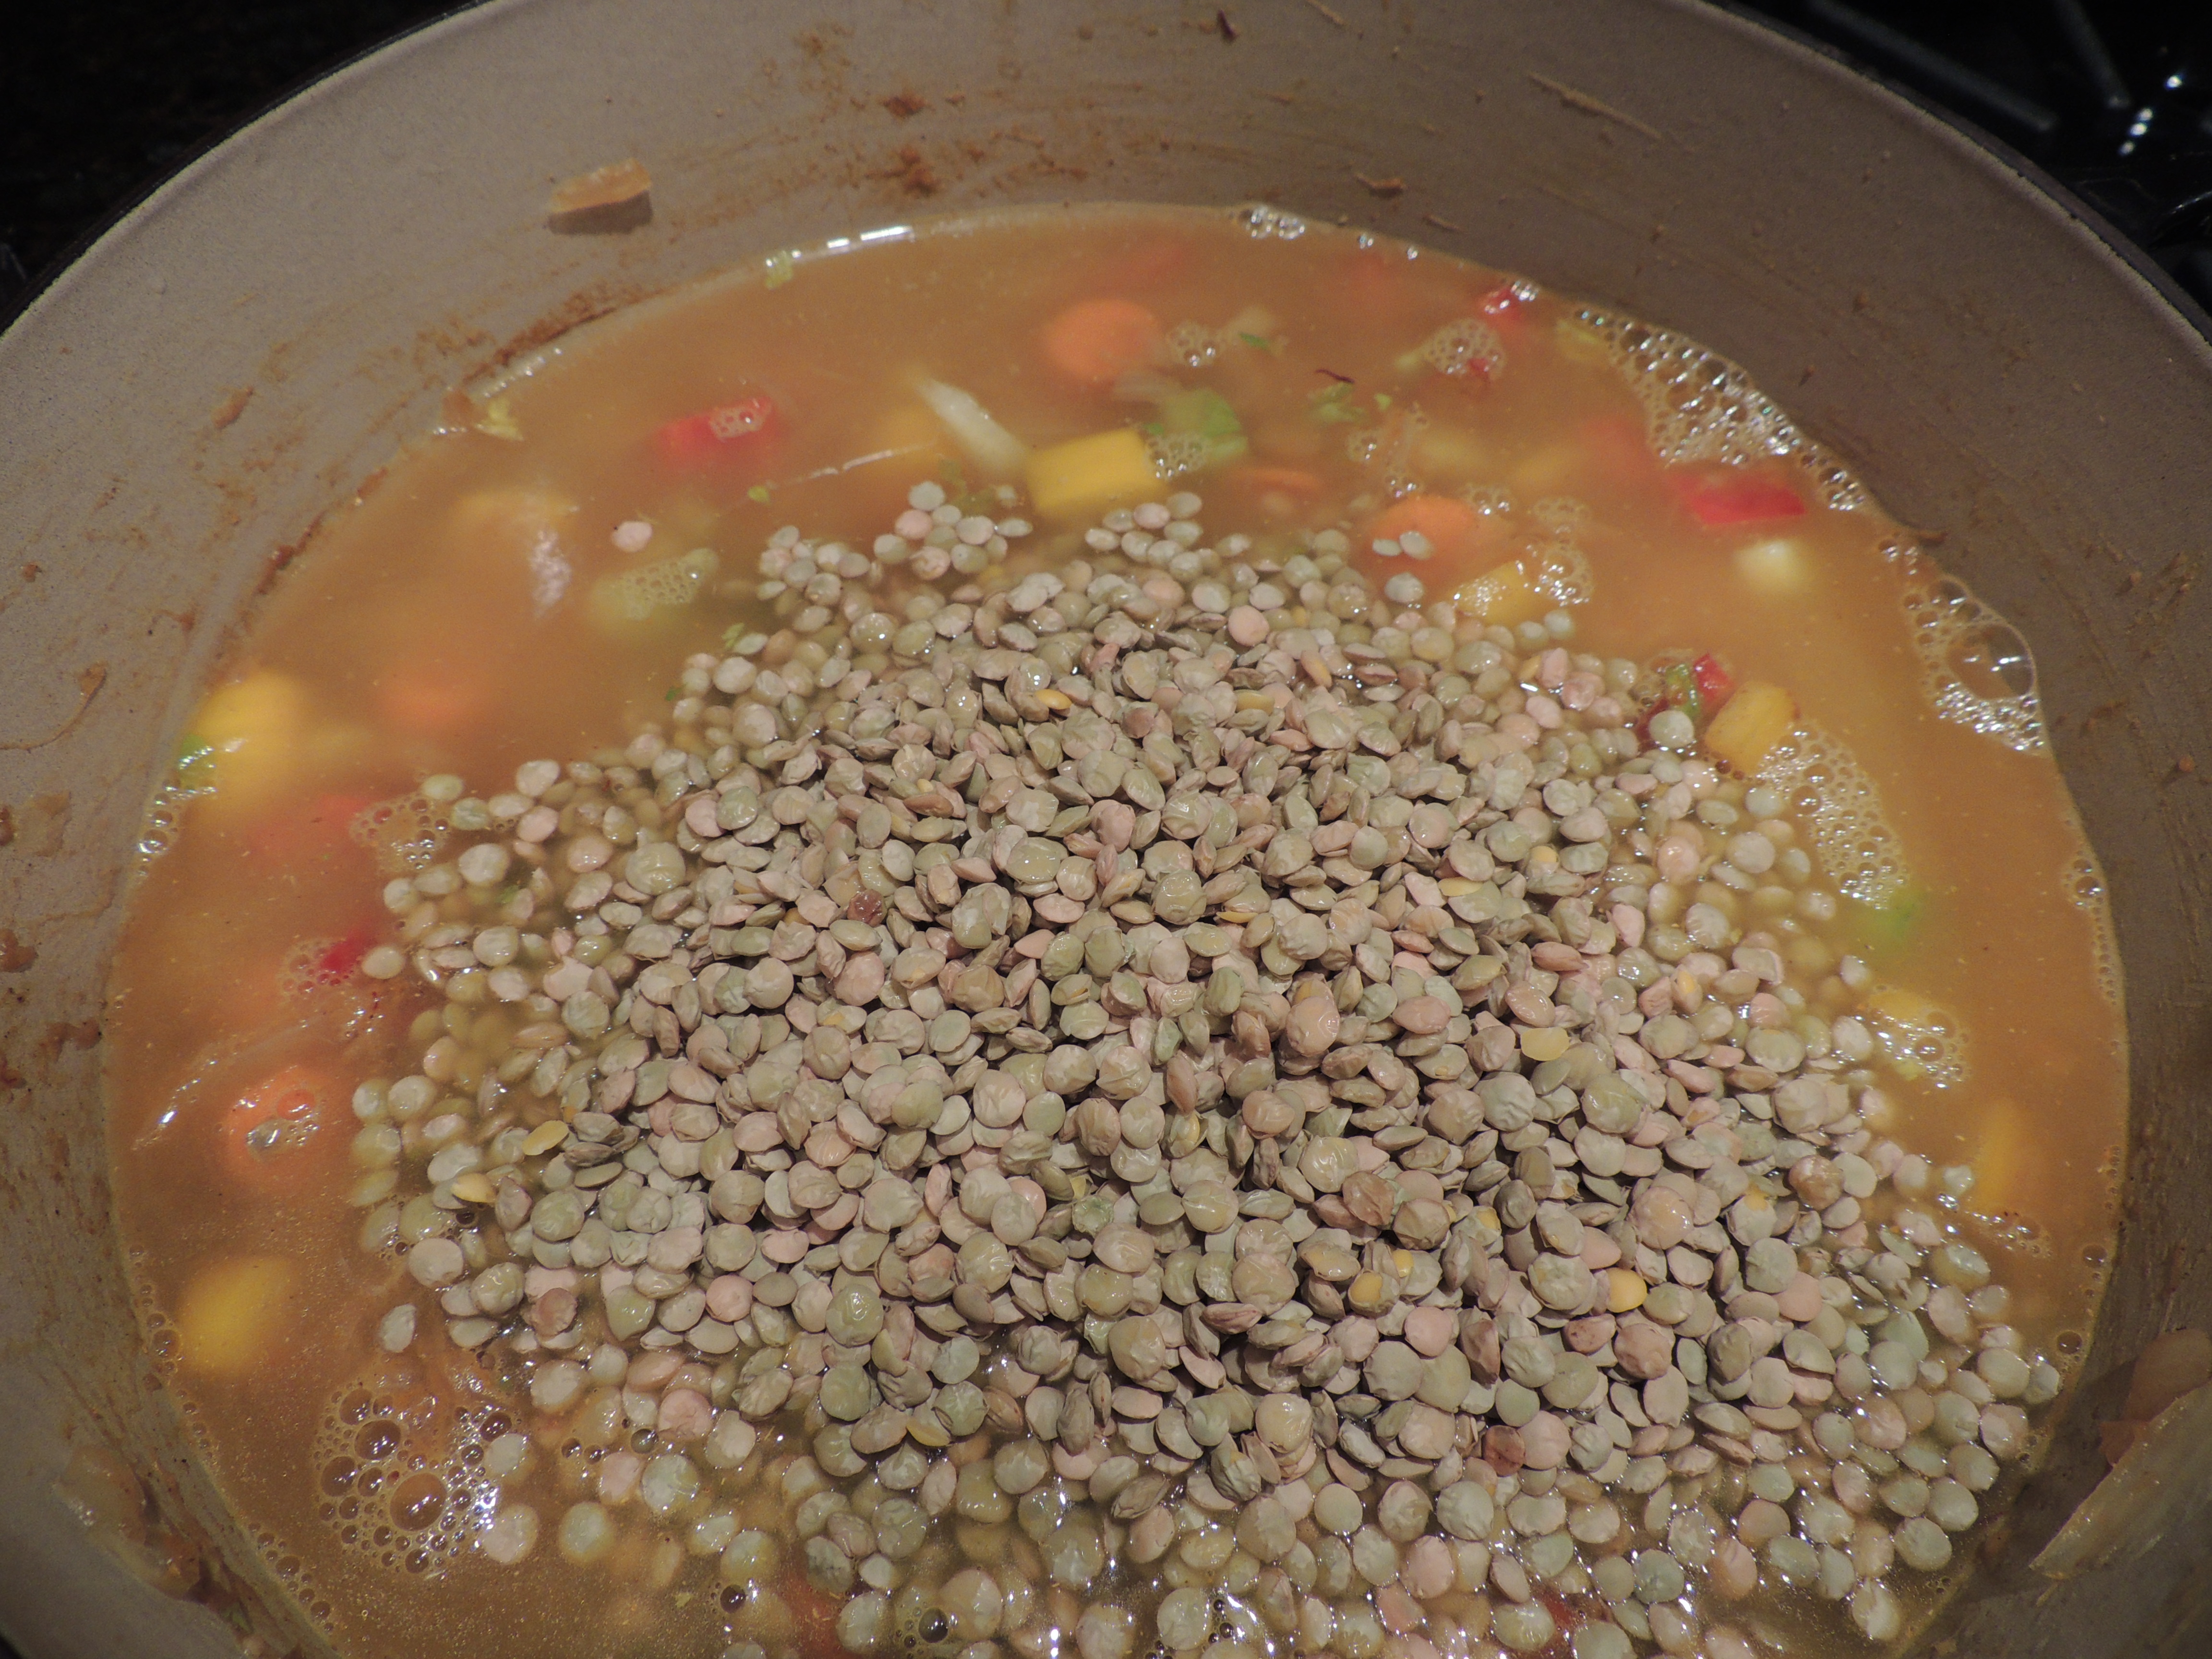 Add the water/stock and lentils.